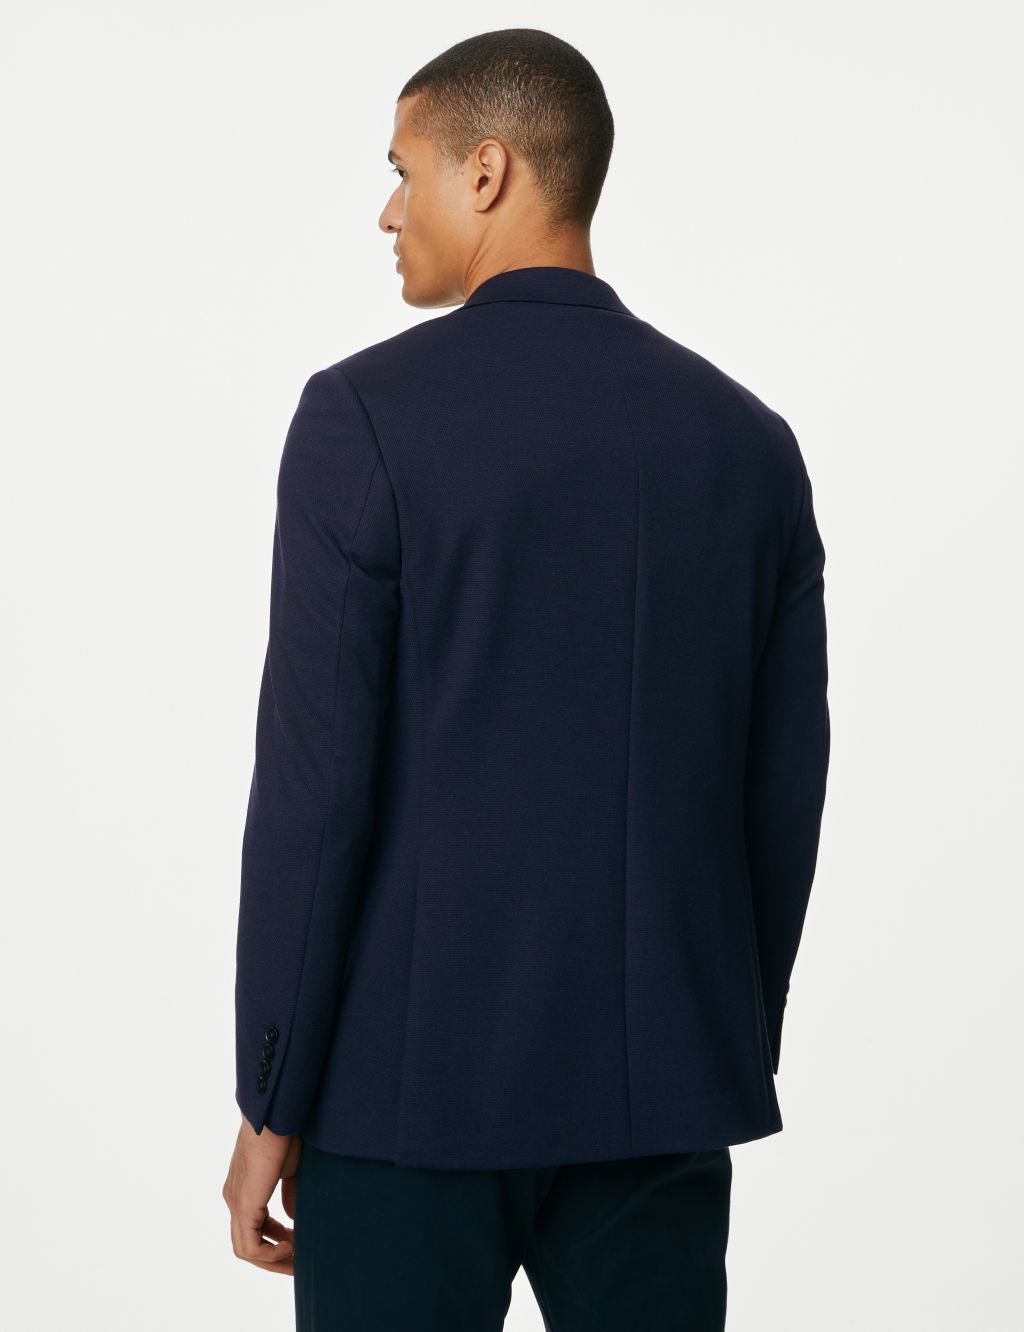 Textured Jersey Jacket with Stretch image 5